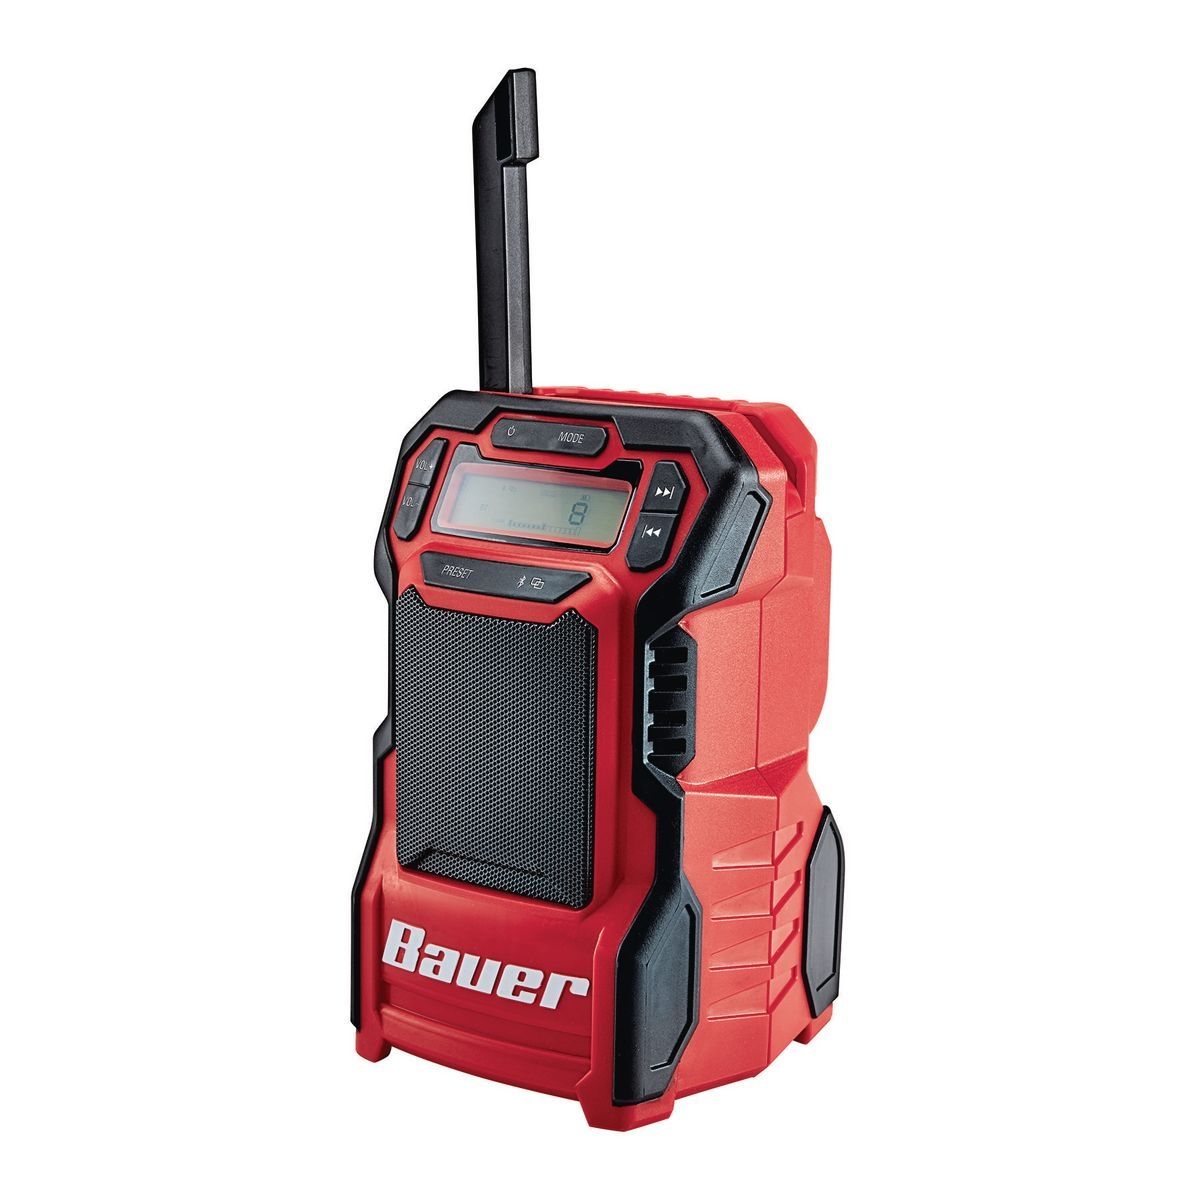 BAUER 20V Cordless Compact Radio with BLUETOOTH - Tool Only